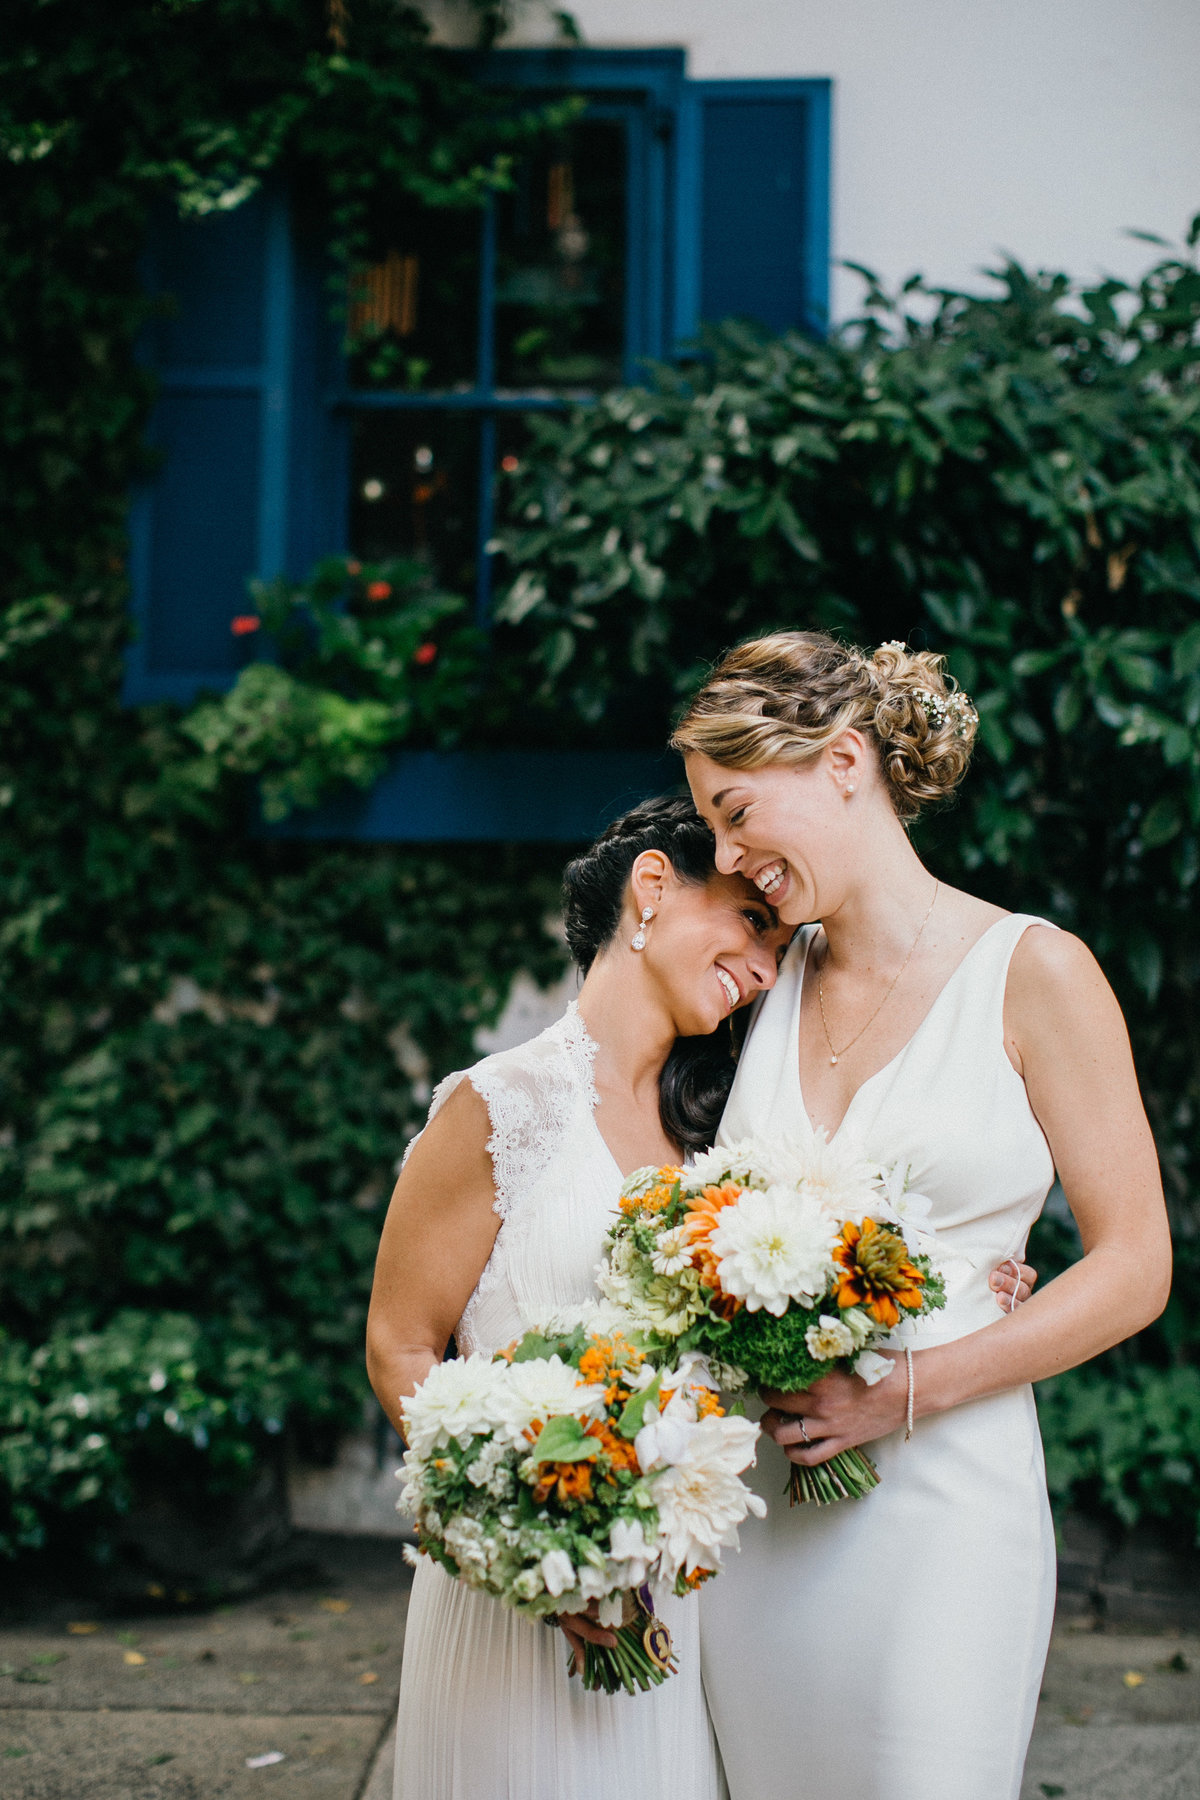 Two brides photographed in Old City, Philadelphia before their wedding.